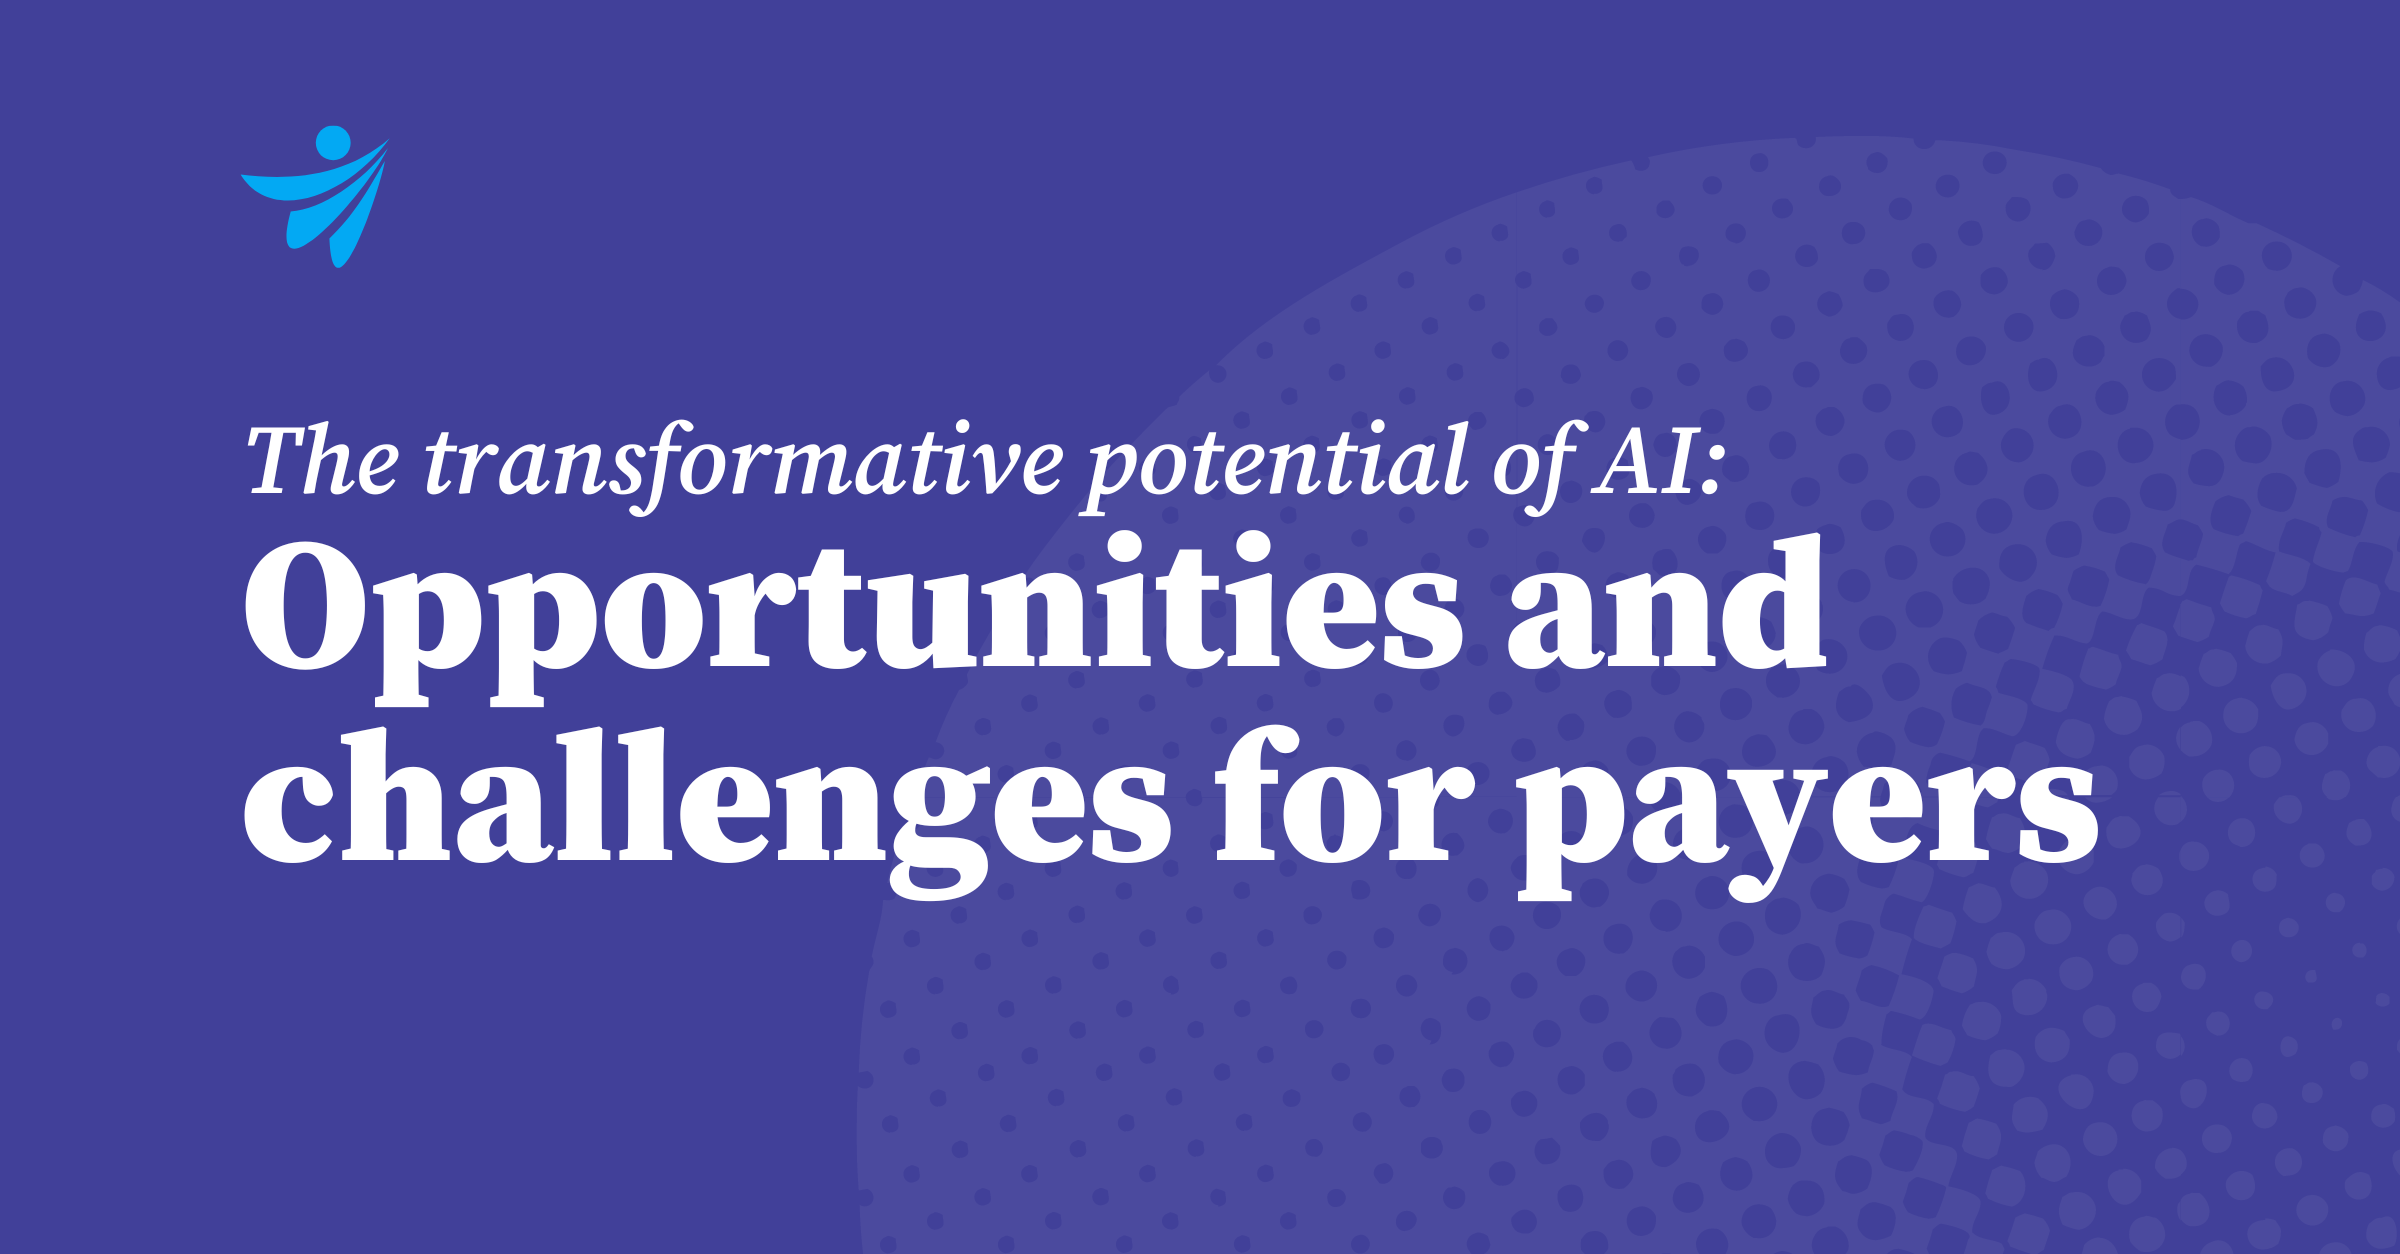 Thumbnail for The transformative potential of AI in healthcare part I: opportunities and challenges for payers